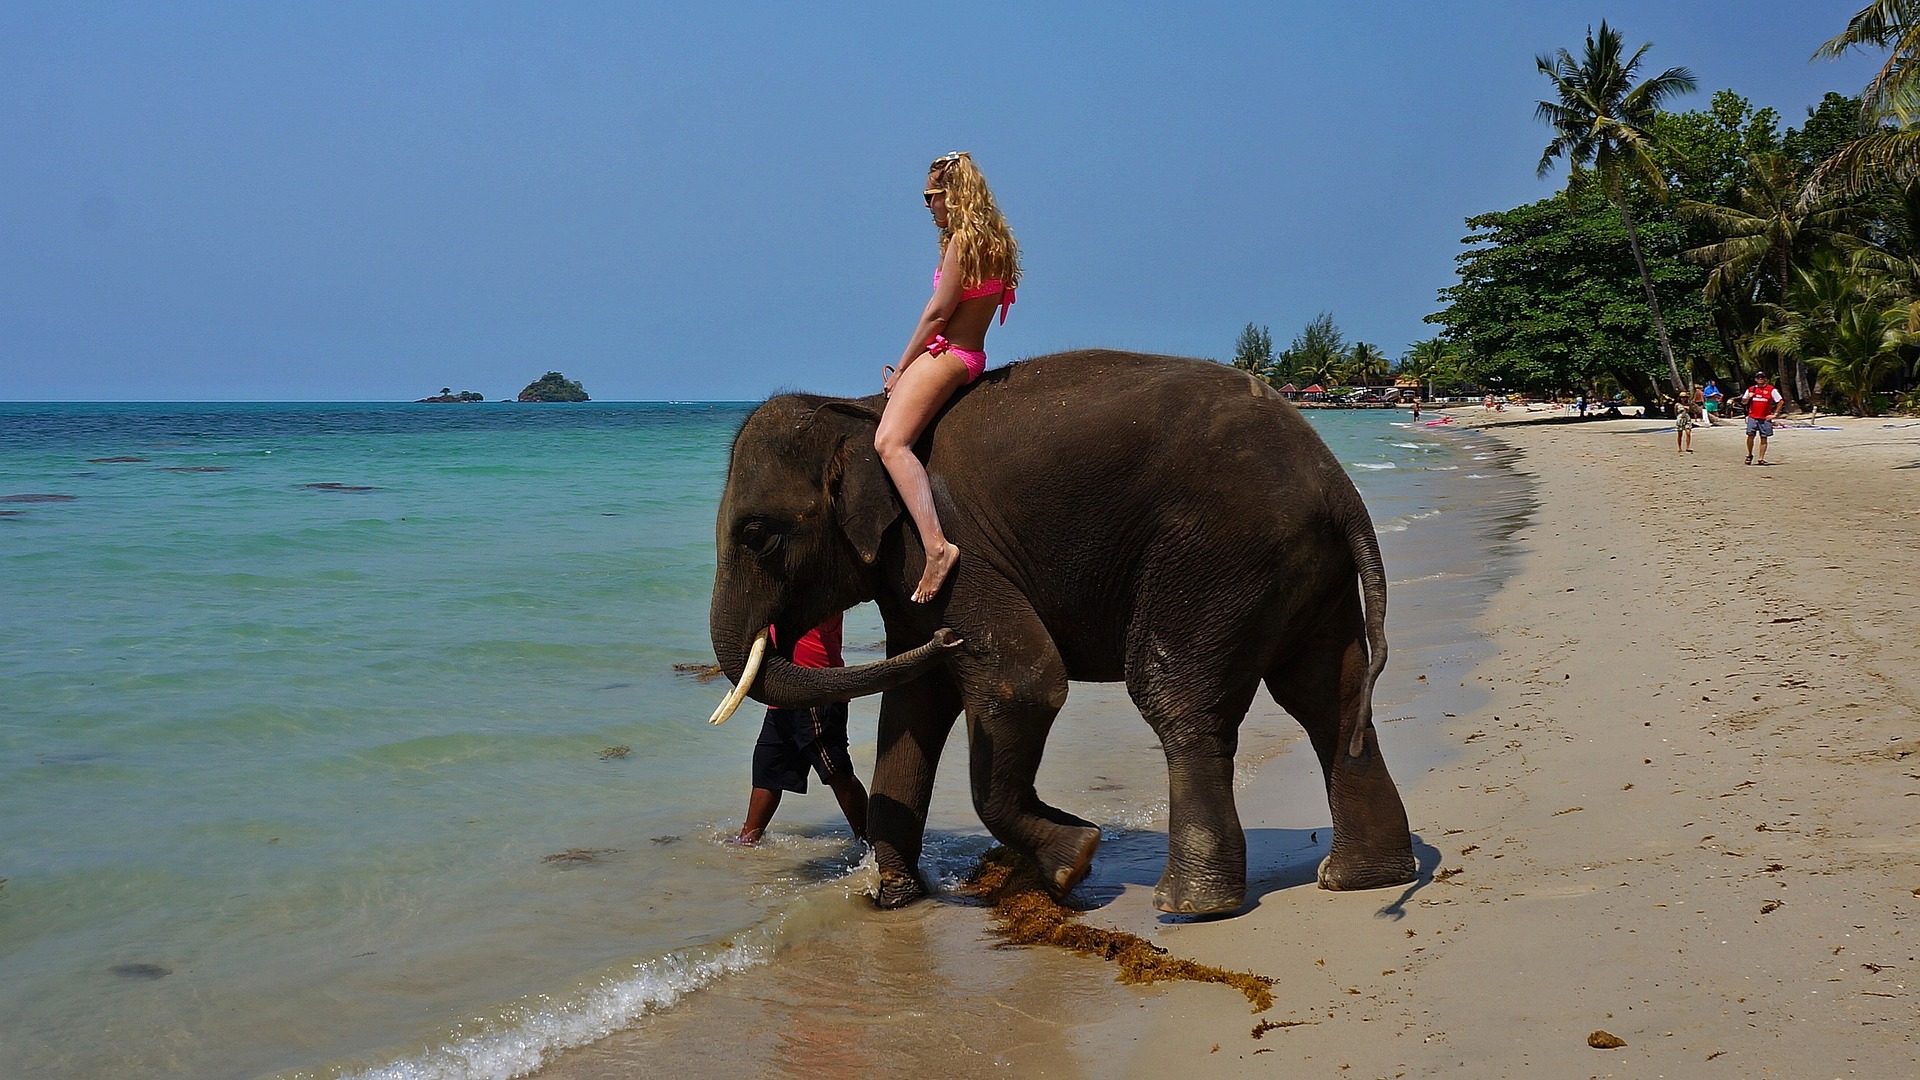 Riding elephant at sea in Thailand